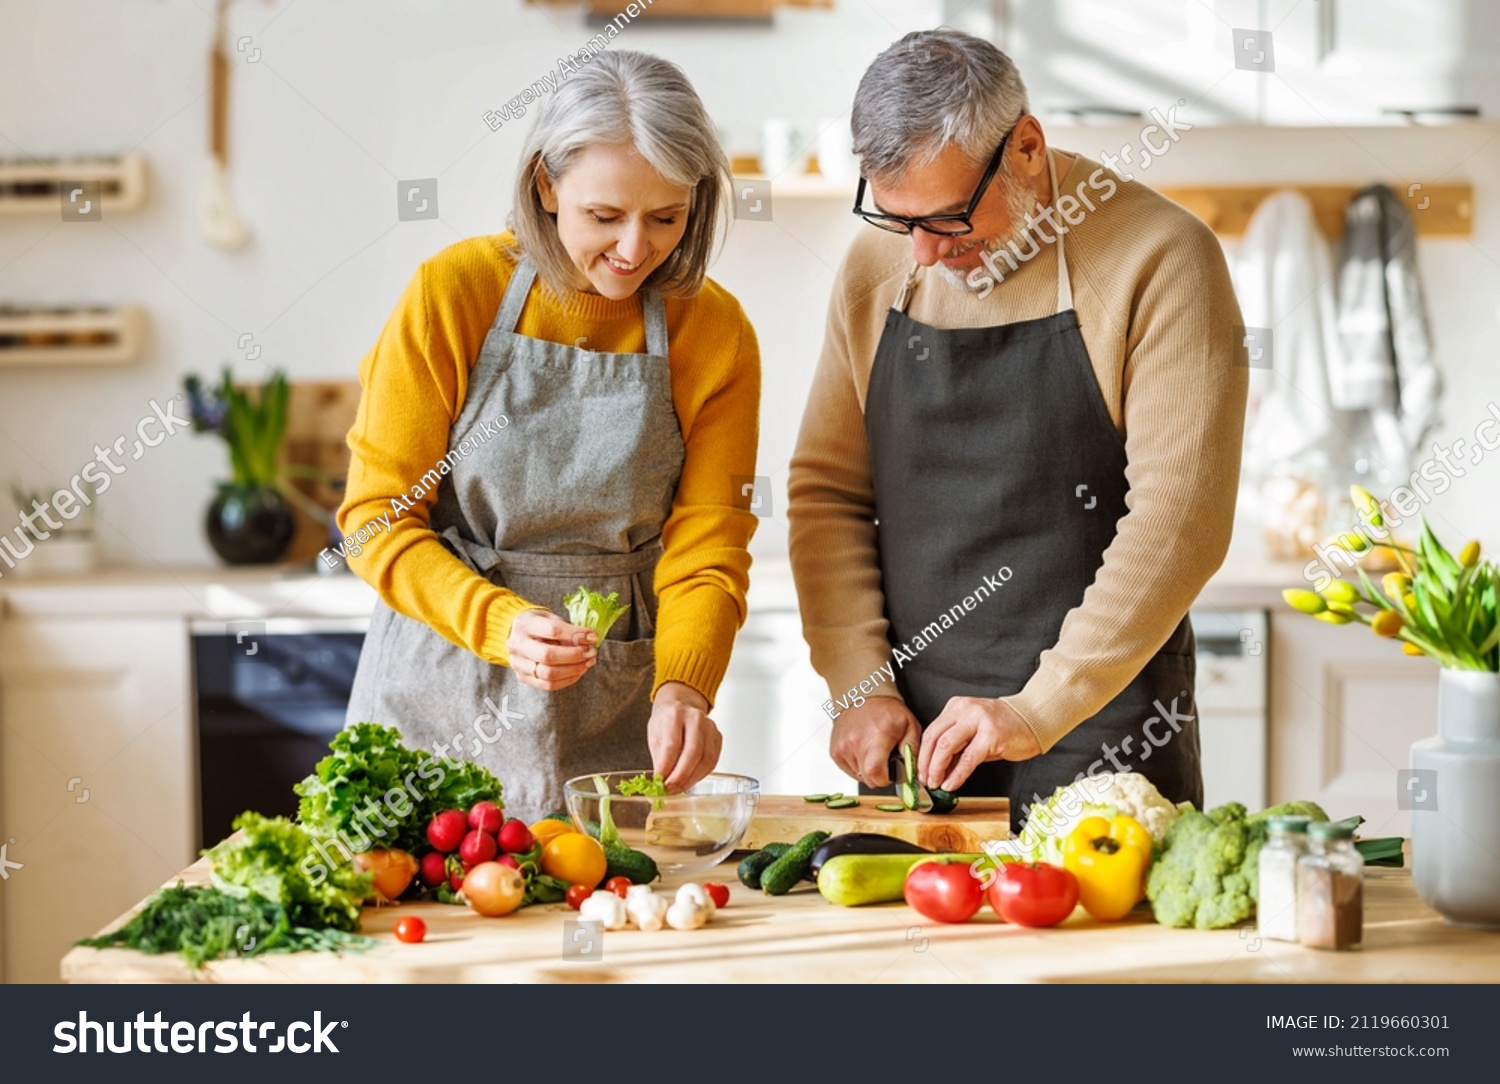 Happy elderly couple smiling husband and wife in aprons prepare salad together at kitchen table, chopping variety of colorful vegetables, trying to maintain healthy lifestyle eating vegetarian food #2119660301